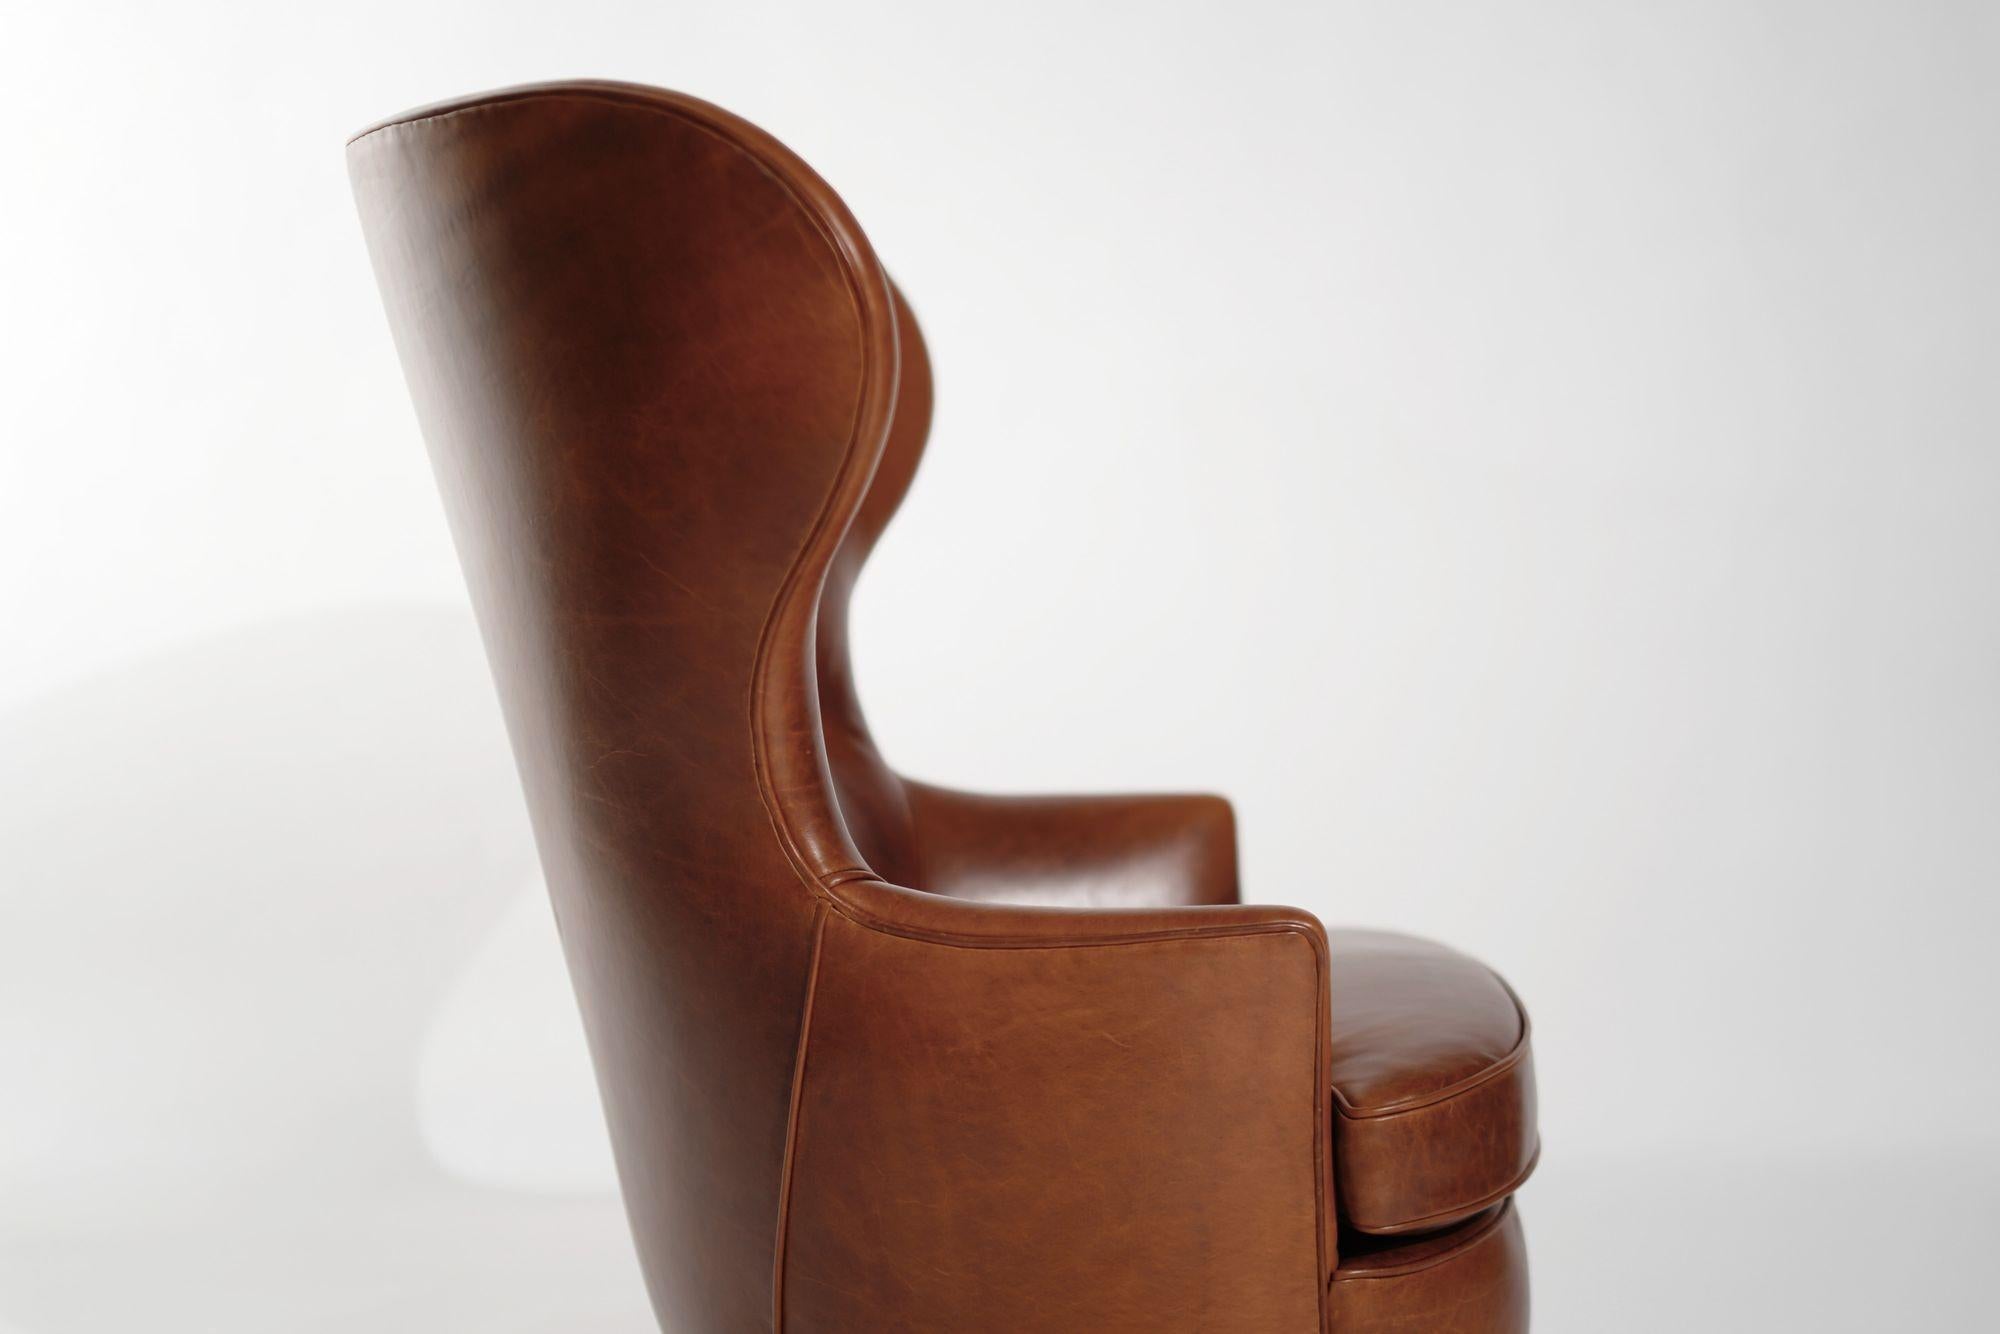 Vintage Wingback Chair in Cognac Leather, C. 1950s For Sale 2